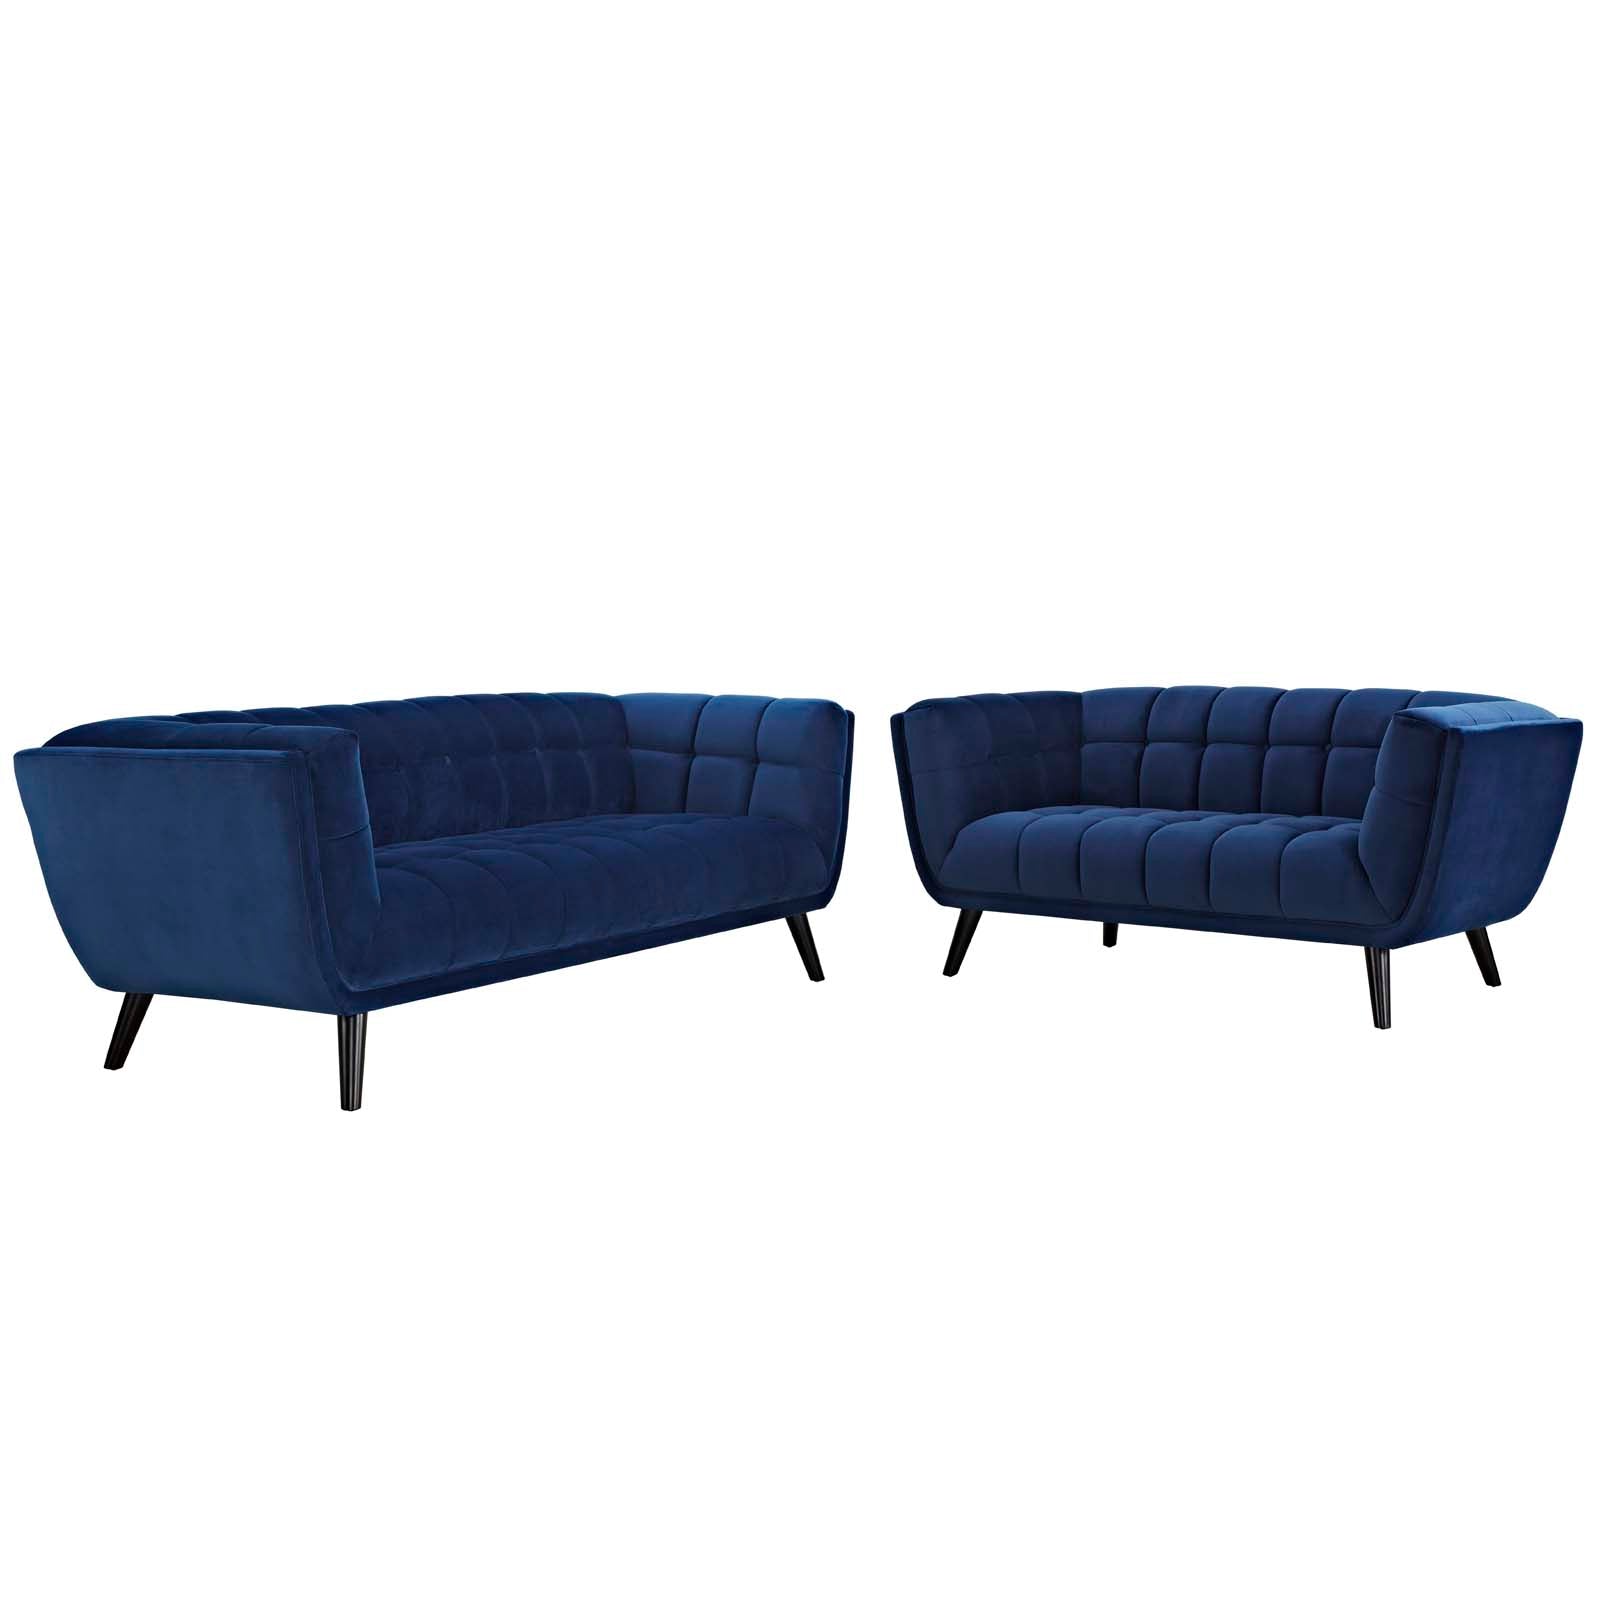 Modway Sofas & Couches - Bestow Performance Velvet Sofa and Loveseat Set Navy ( Set of 2 )